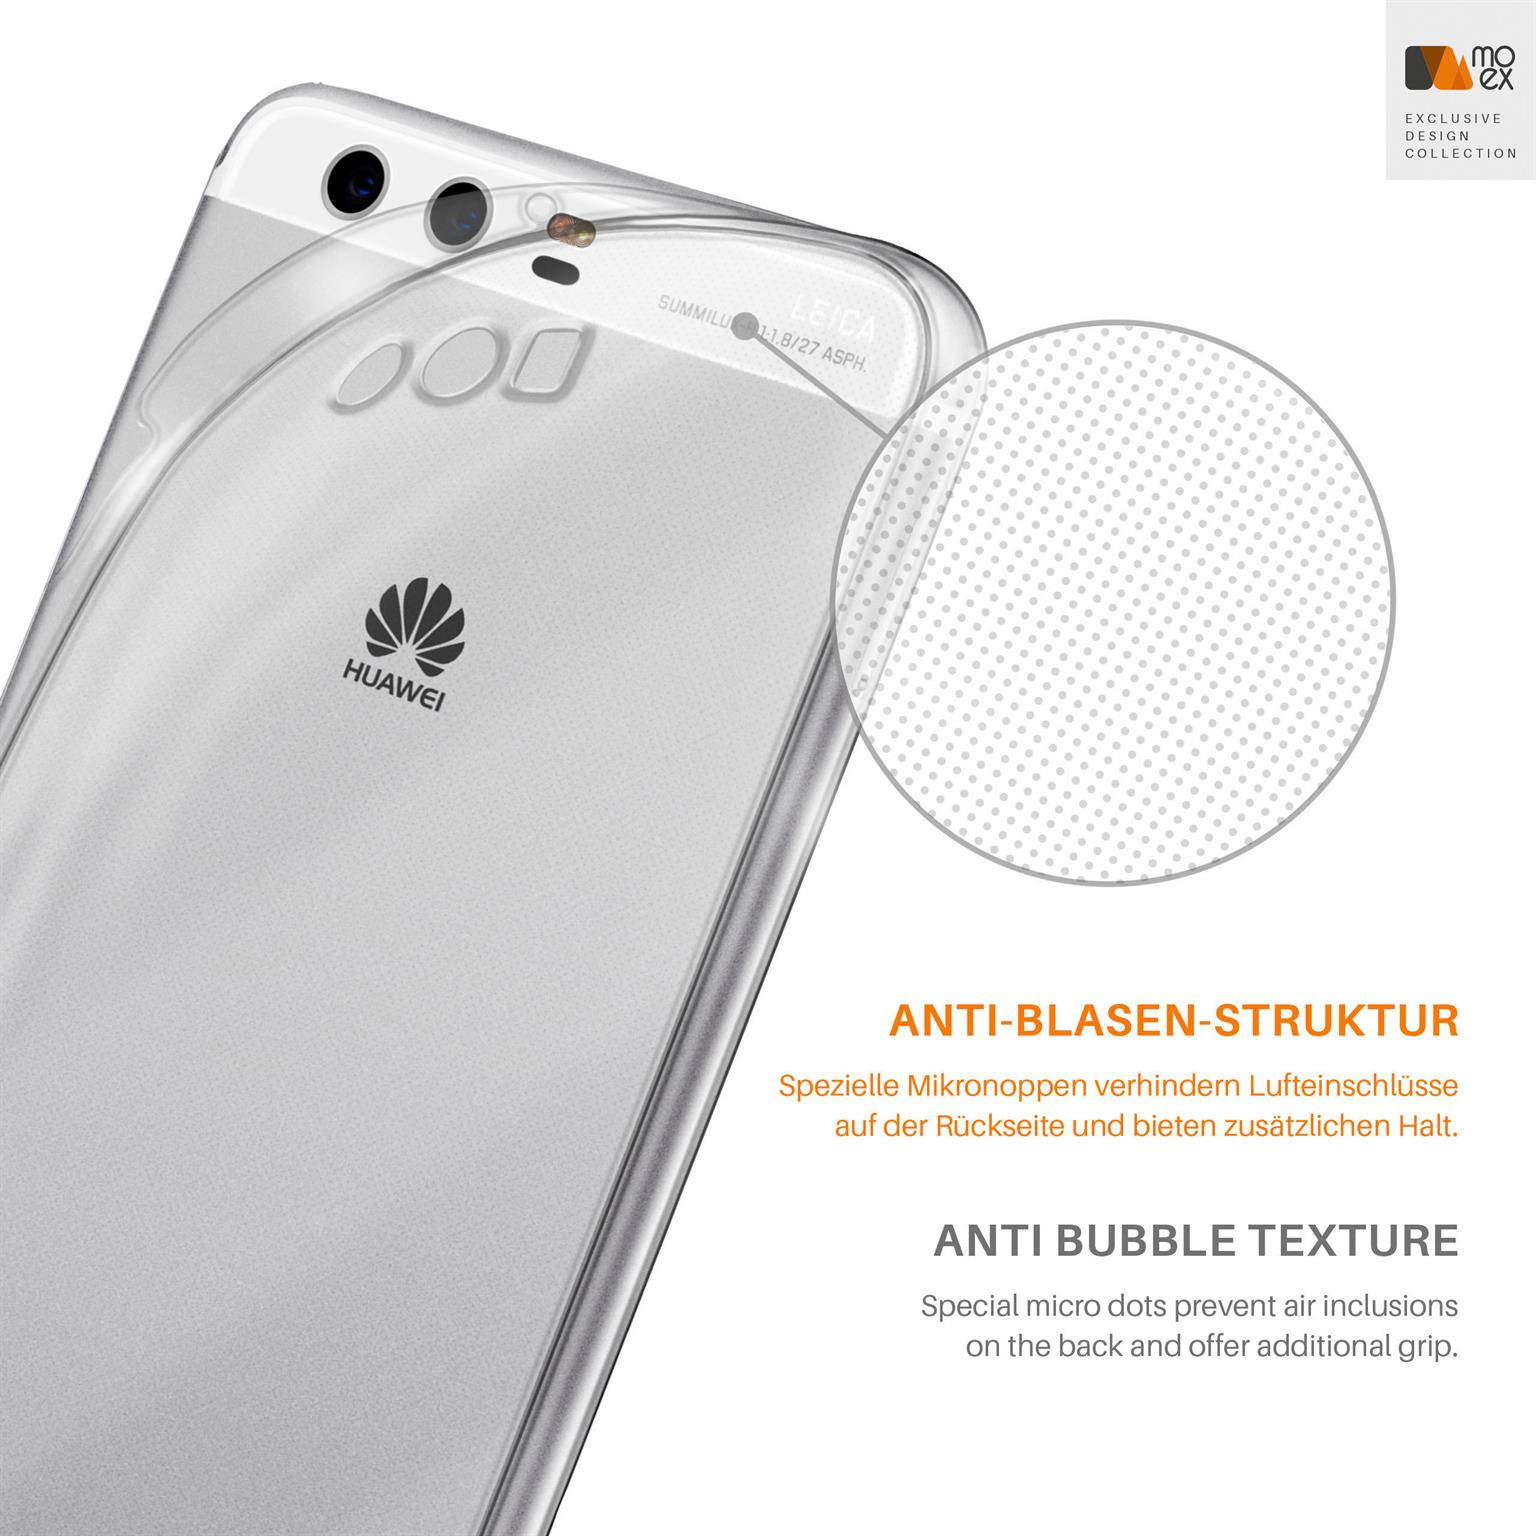 Case, Huawei, P10, MOEX Backcover, Aero Crystal-Clear